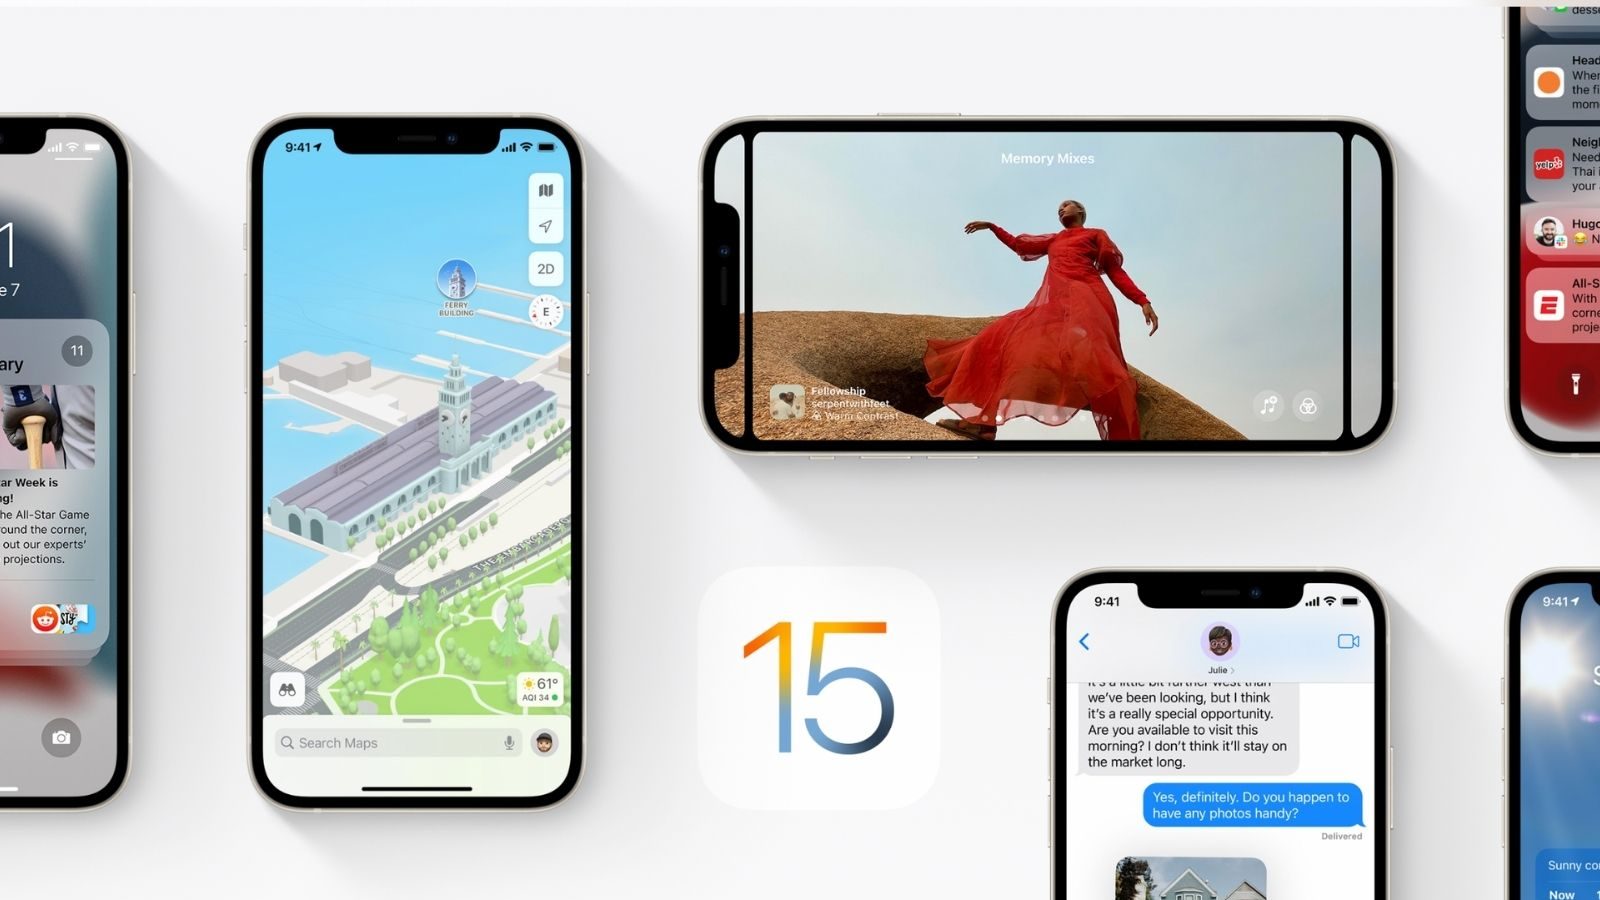 Apple iPhone Users, Get Ready For These New Features When iOS 15 Rolls Out